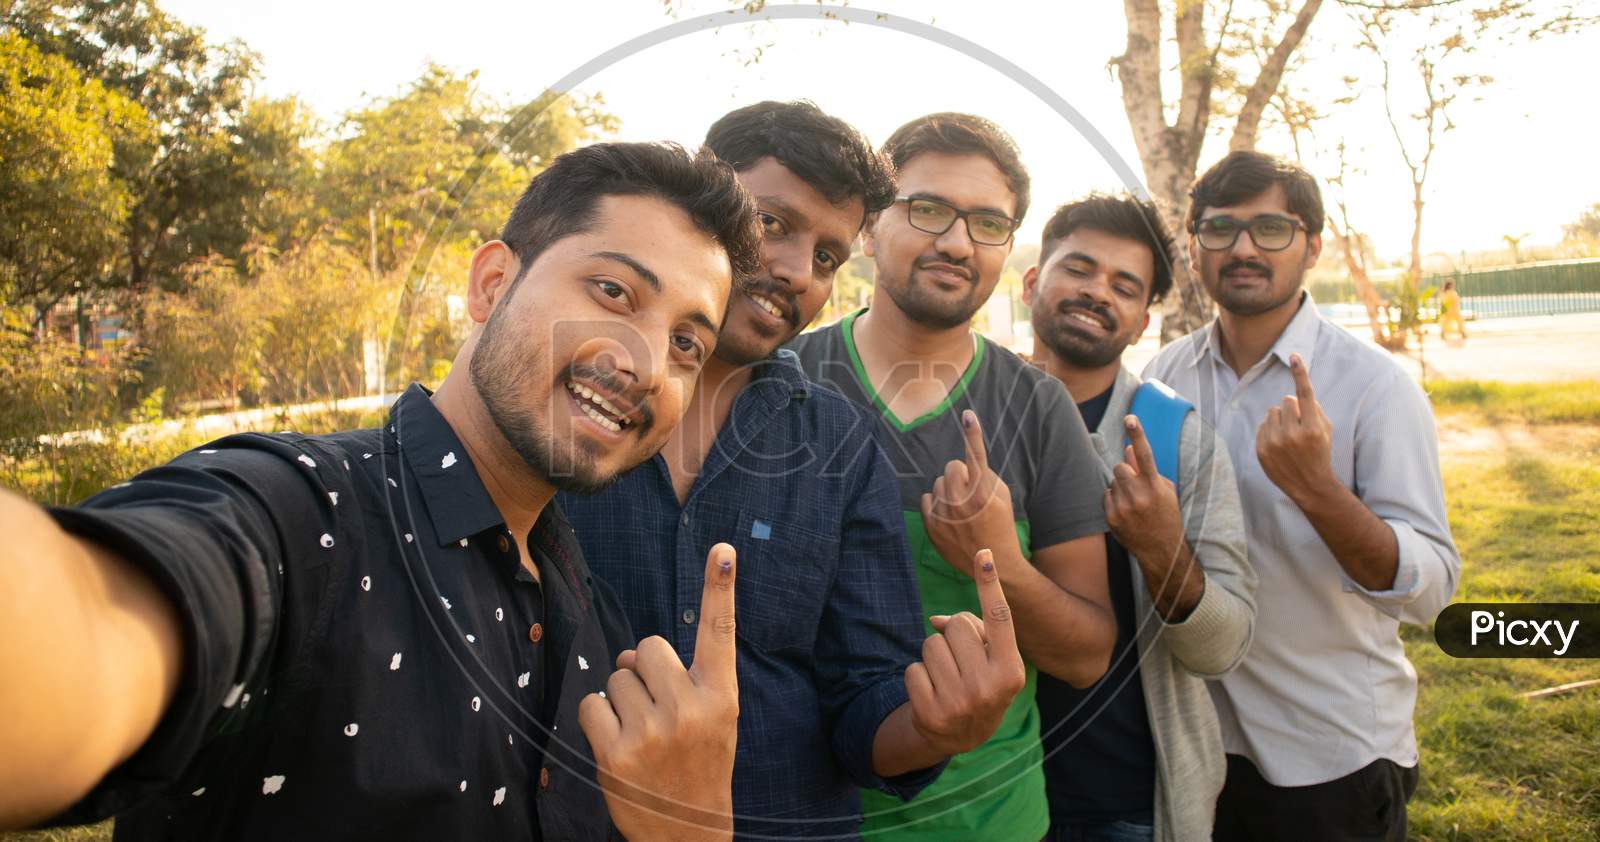 Group Of Friends Taking A Self Portrait In The Park - Young Indian Men's showing their Voted Finger